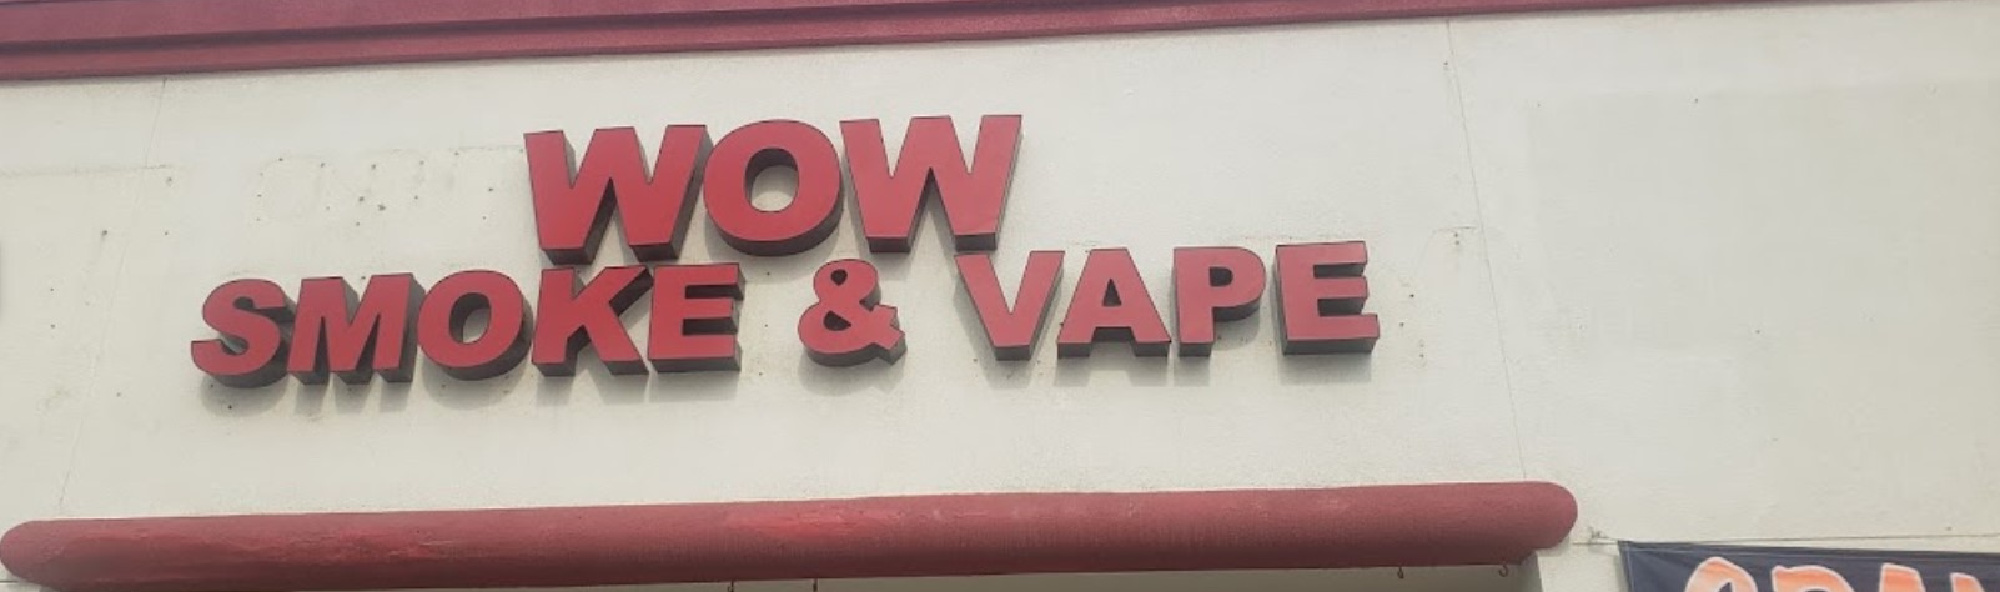 image of wow smoke and vape in bakersfield ca